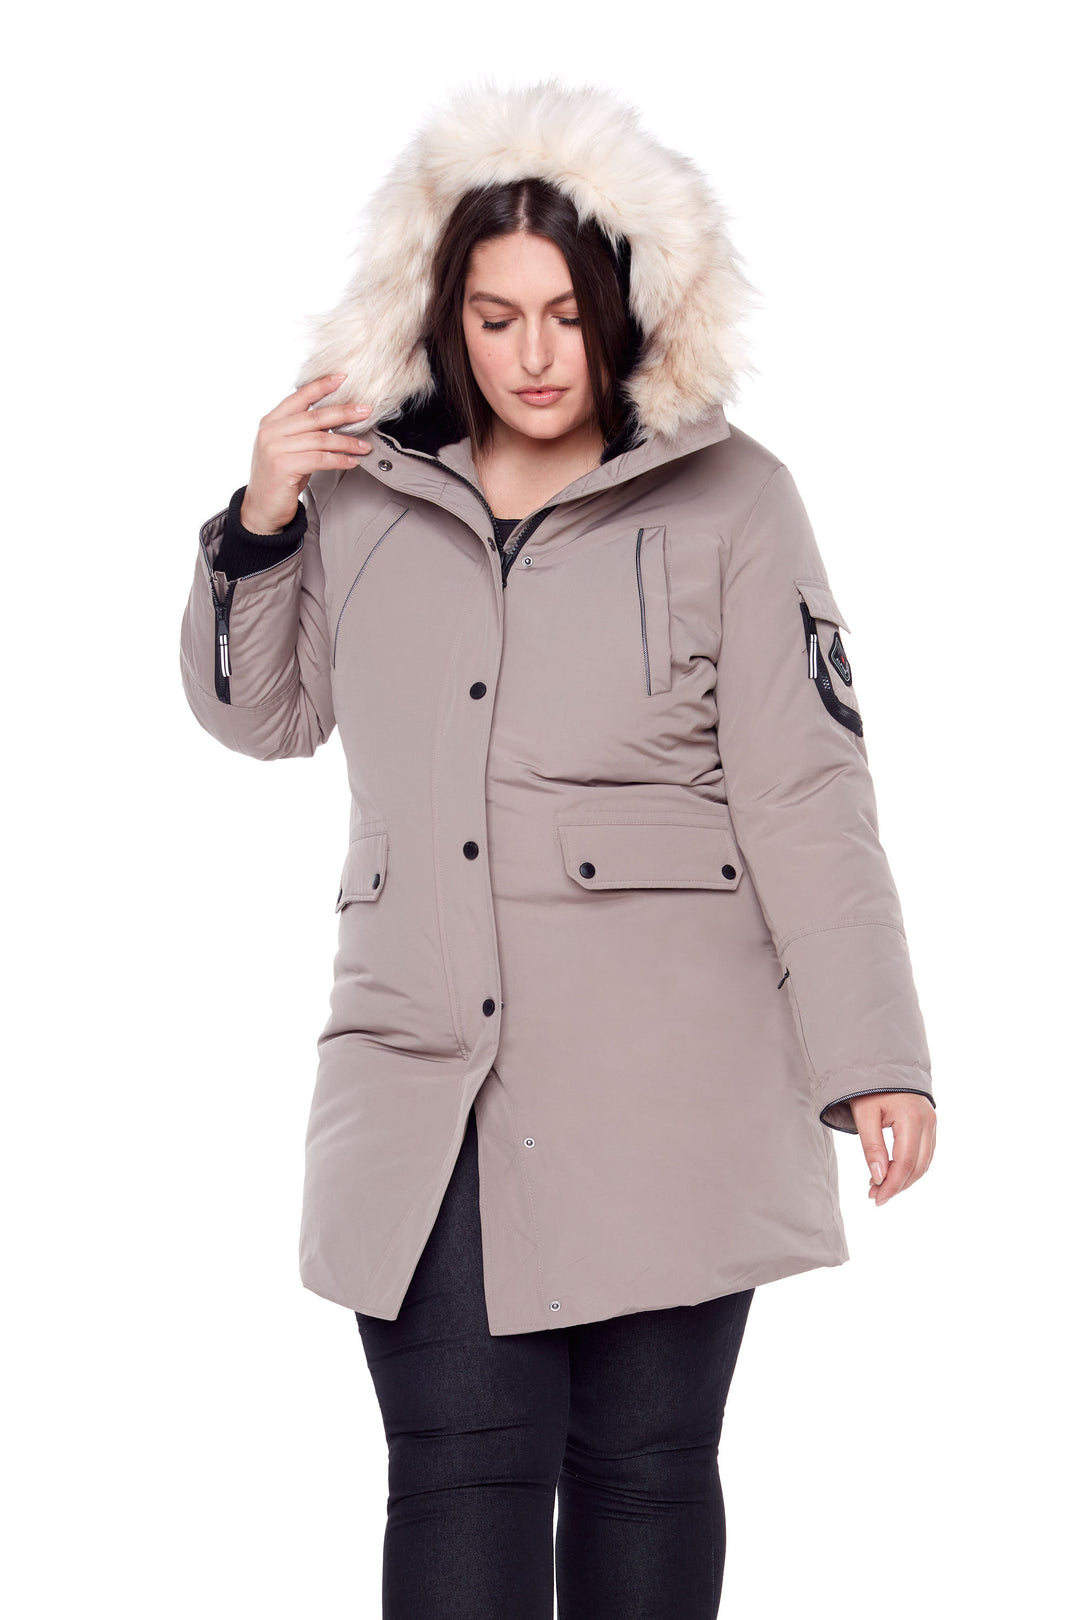 WOMEN'S VEGAN DOWN (RECYCLED) LONG PARKA, TAUPE (PLUS SIZE)